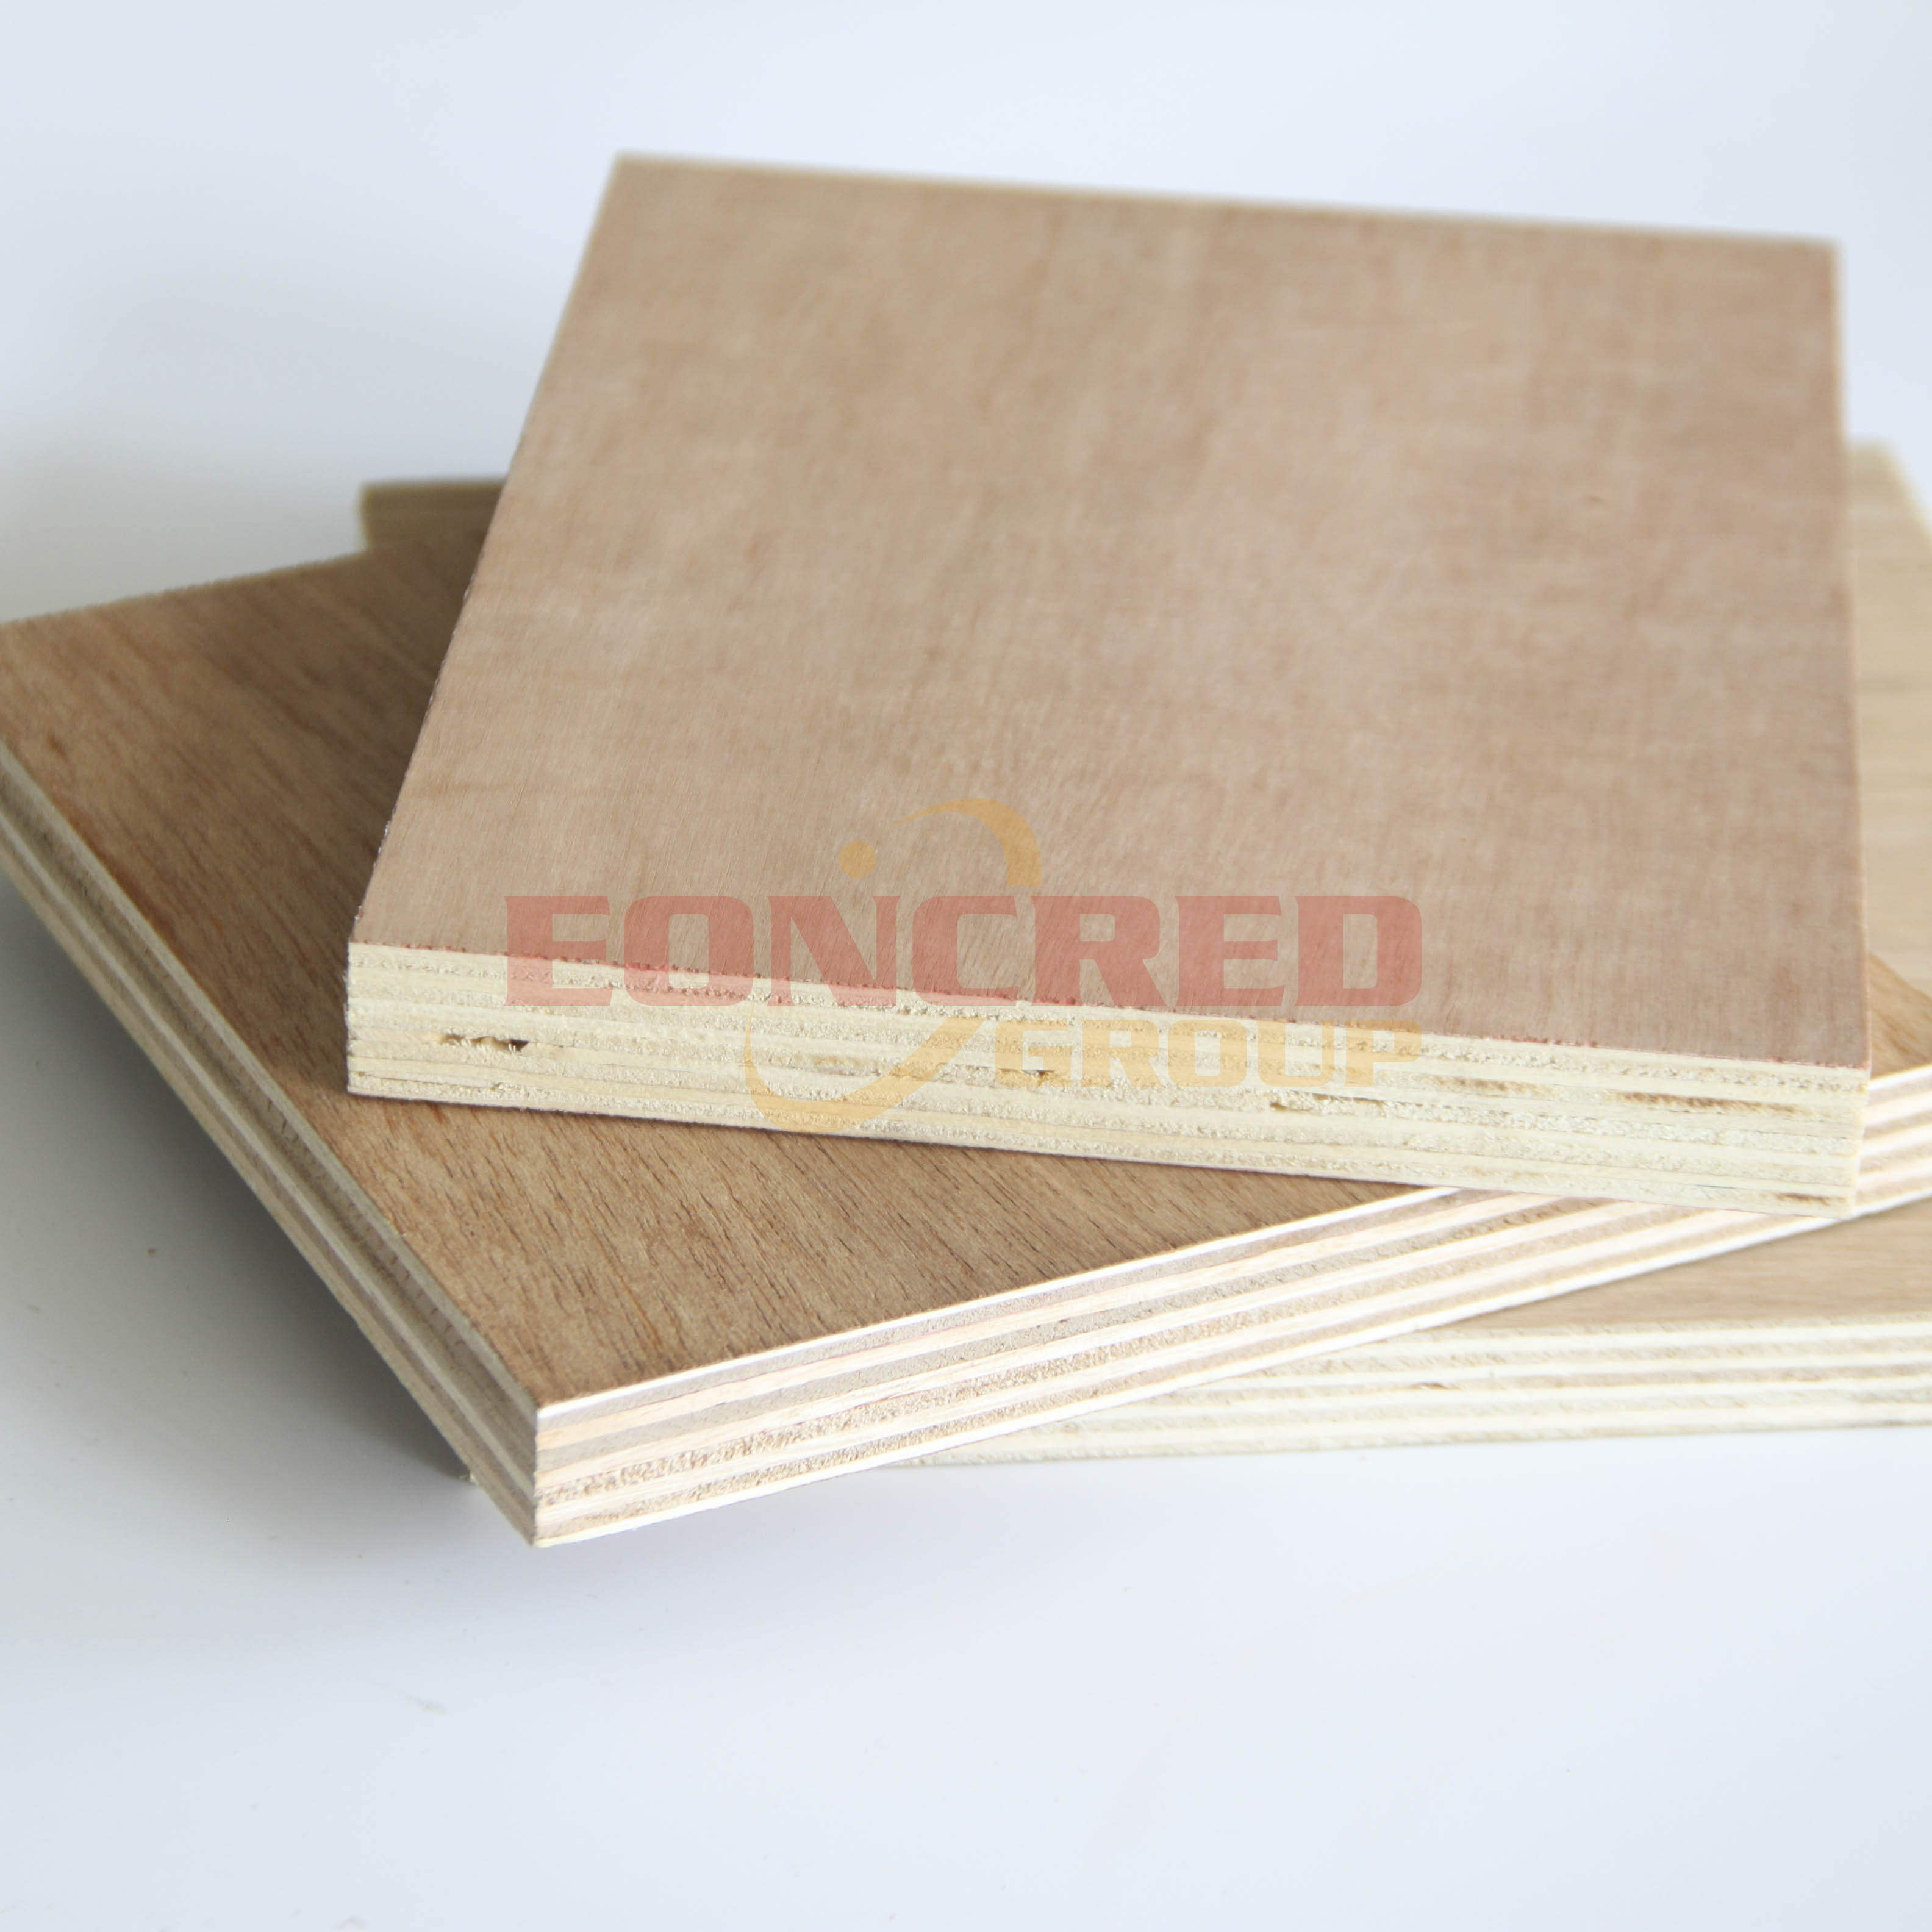 Whole Sale AB、 BC Grade Plywood 12mm/15mm/19mm Used in Furniture, Packaging, Flooring, Doors, Kitchen Cabinets